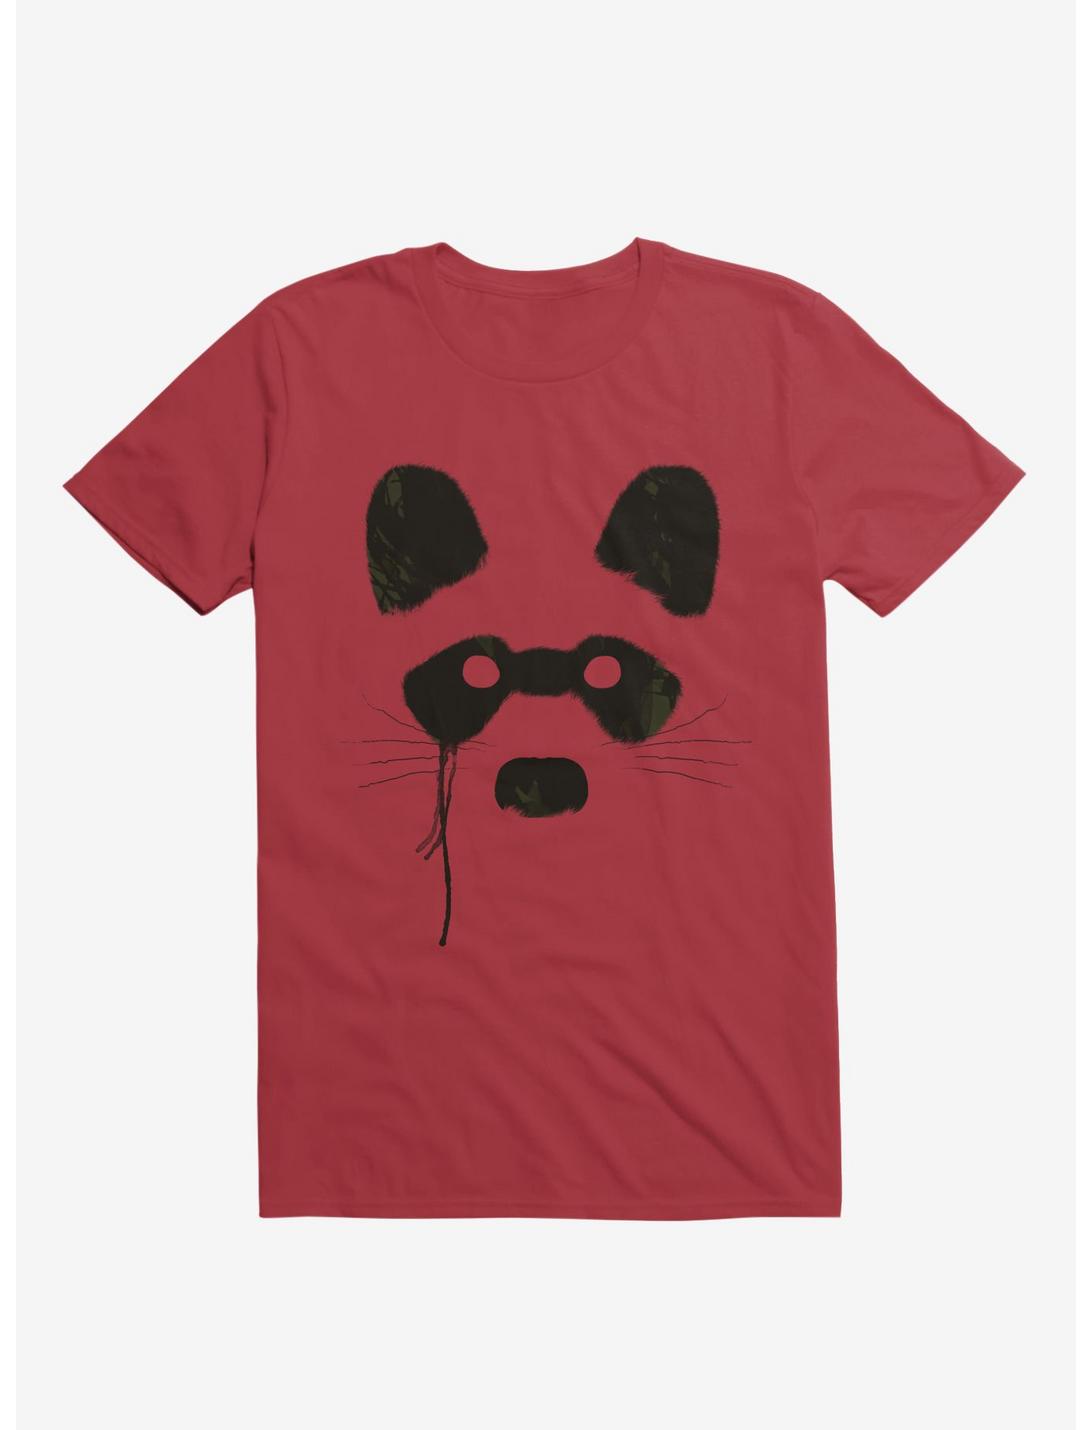 Racoon T-Shirt, RED, hi-res